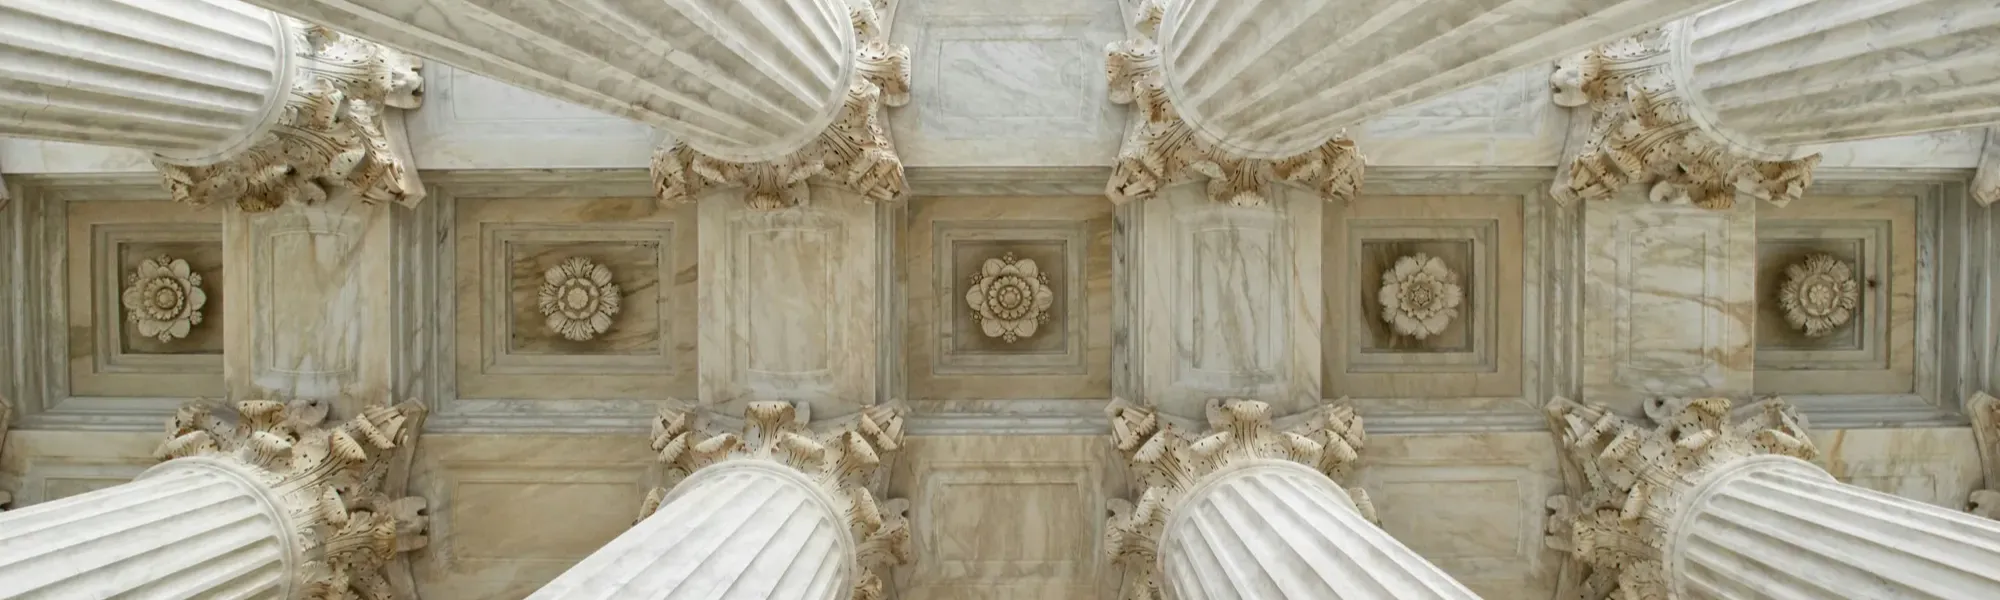 Stone pillars and ornate ceiling from a historic building